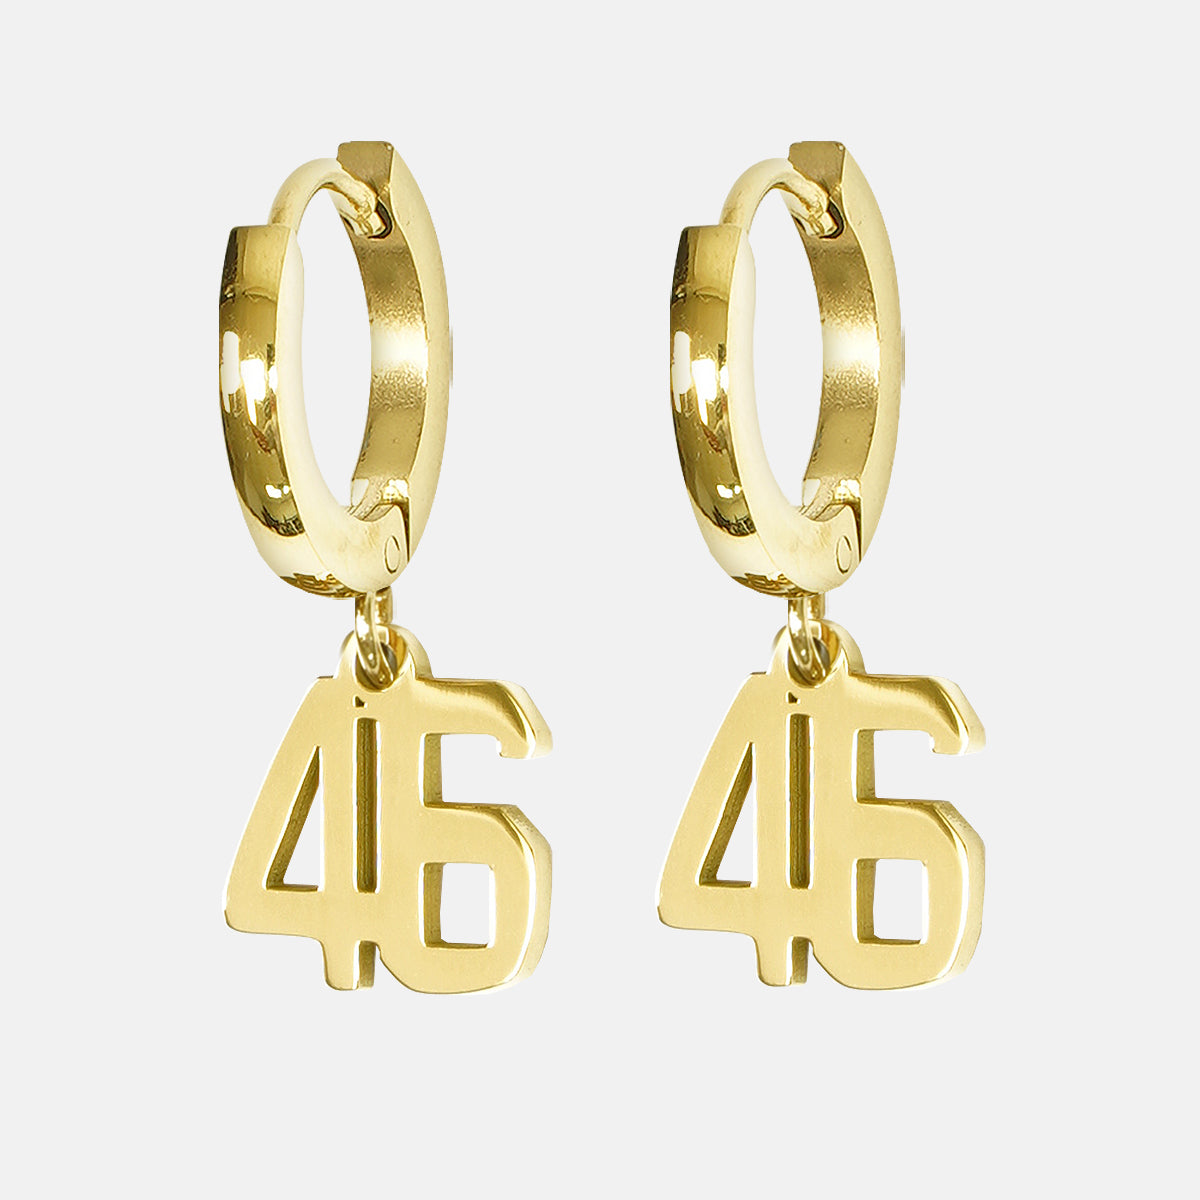 46 Number Earring - Gold Plated Stainless Steel